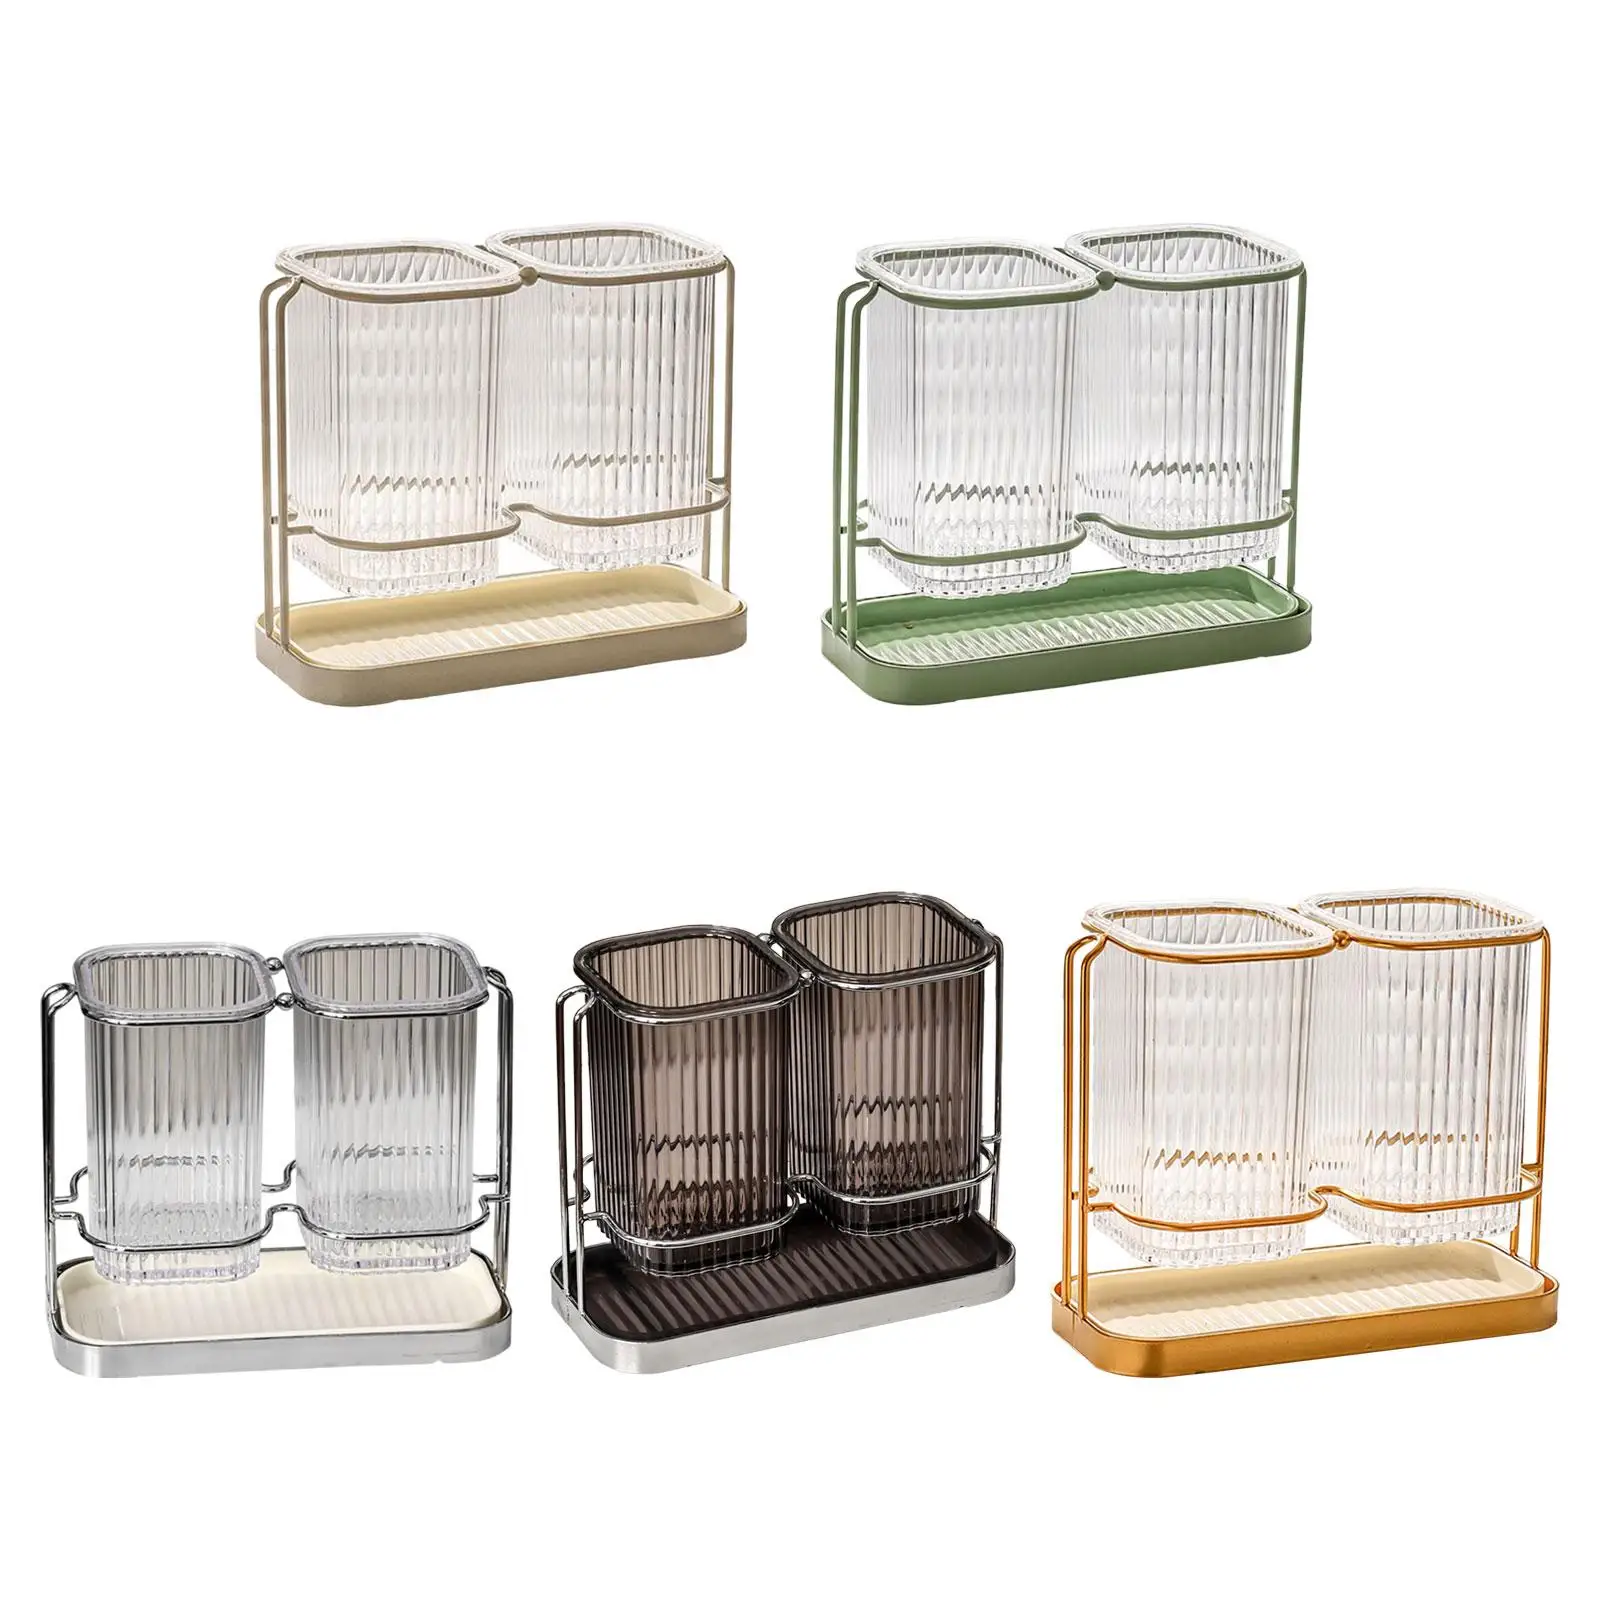 

Kitchen Utensil Holder with Drain Tray Draining Chopstick Cage Utensil Organizer for Party Restaurante Counter Home Flatware